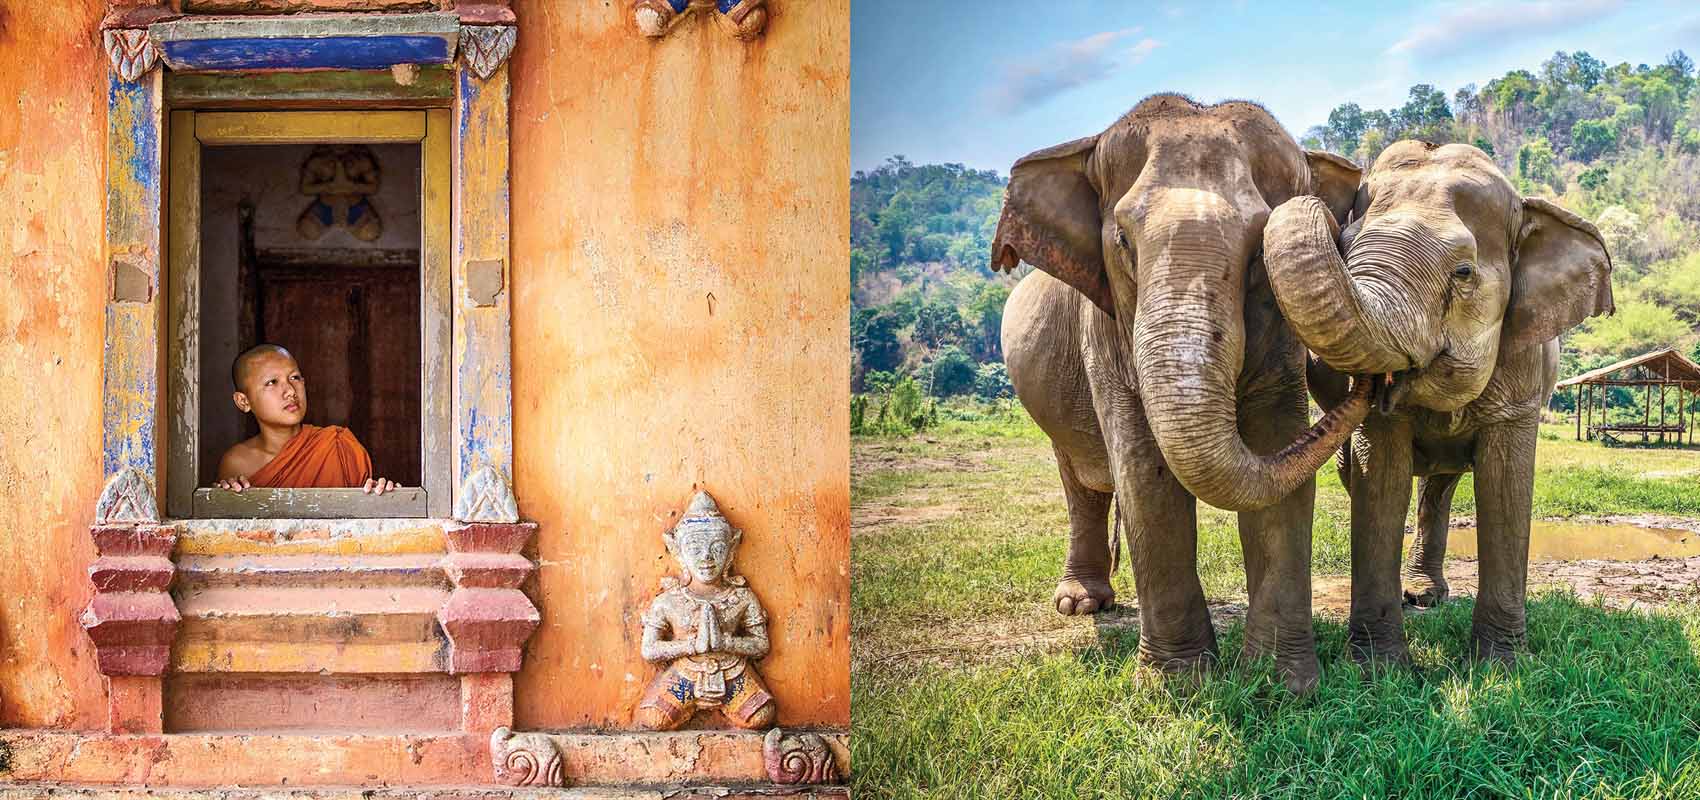 Left: Novice monk gazes out the window of a Buddhist temple. Right: Elephants nuzzle in northern Thailand.